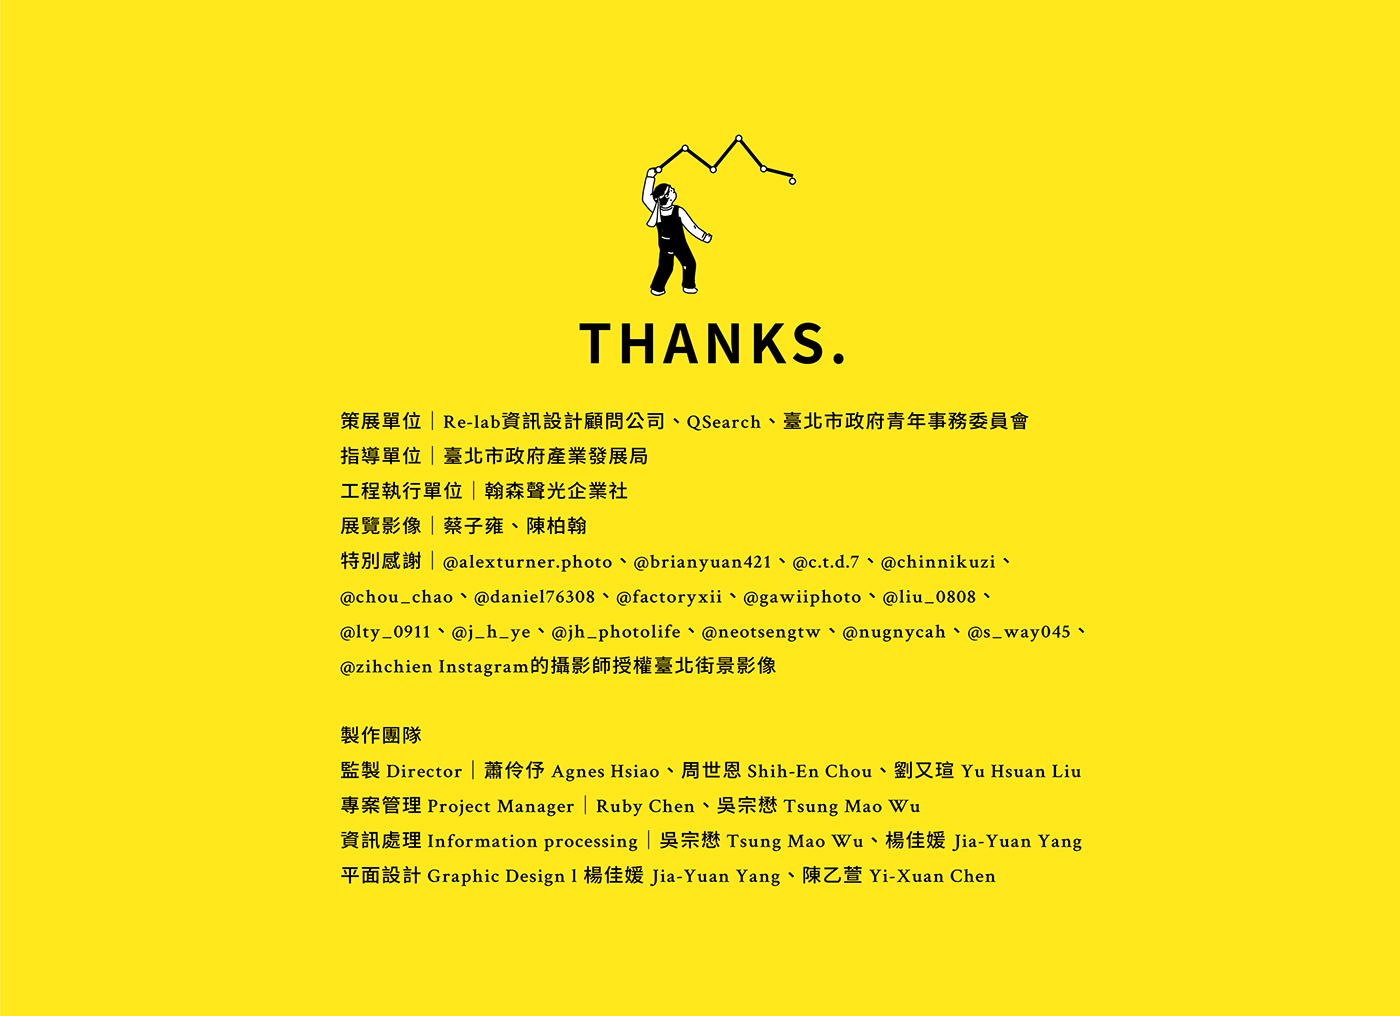 infographic 展覽 culture Exhibition  graphic design  interaction 互動設計 平面設計 文化 資訊圖表